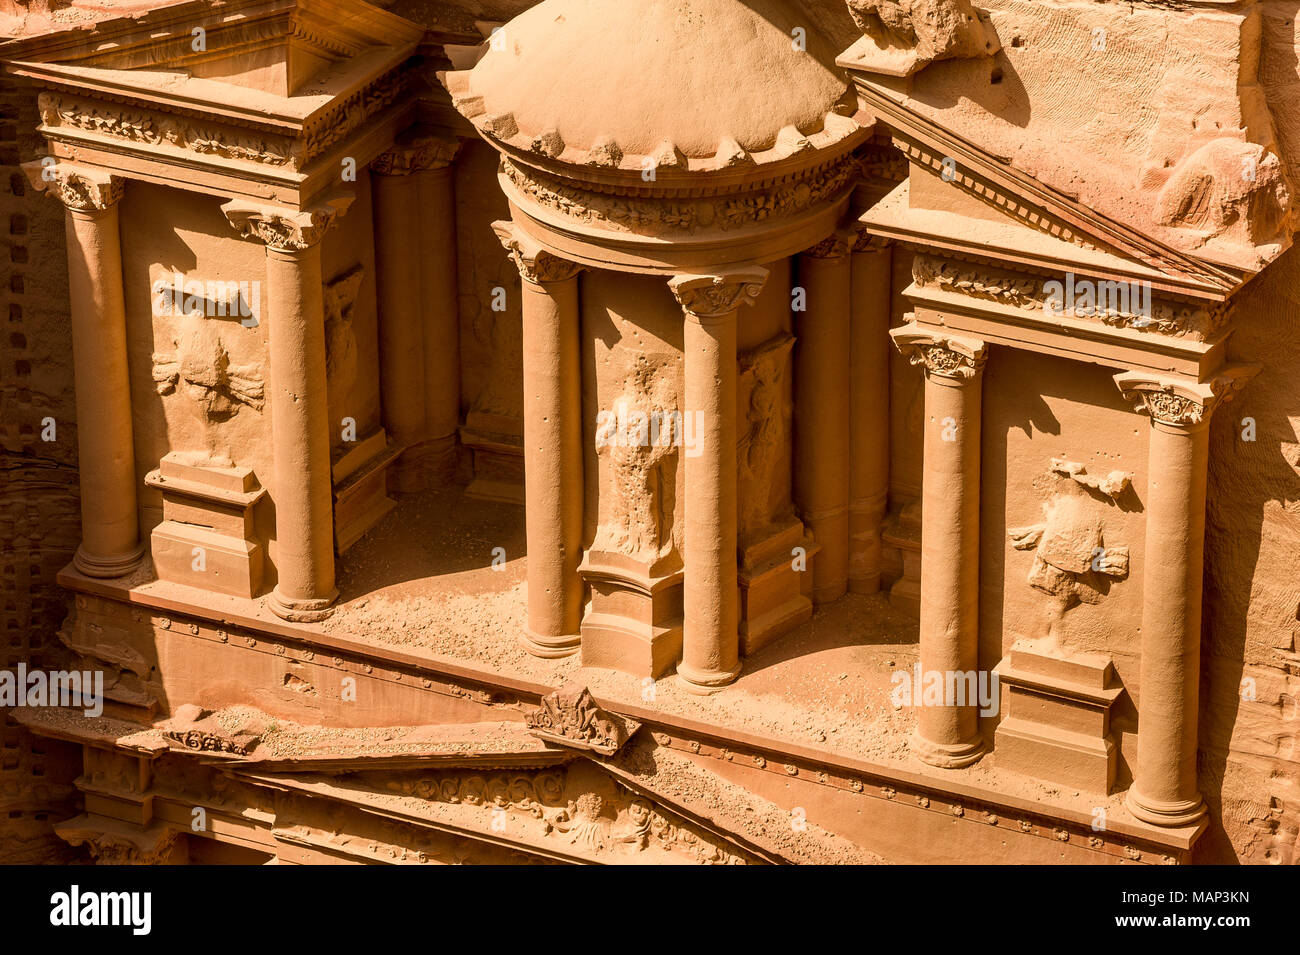 Al-Khazneh is one of the most elaborate temples in the ancient Arab Nabatean Kingdom city of Petra. Stock Photo